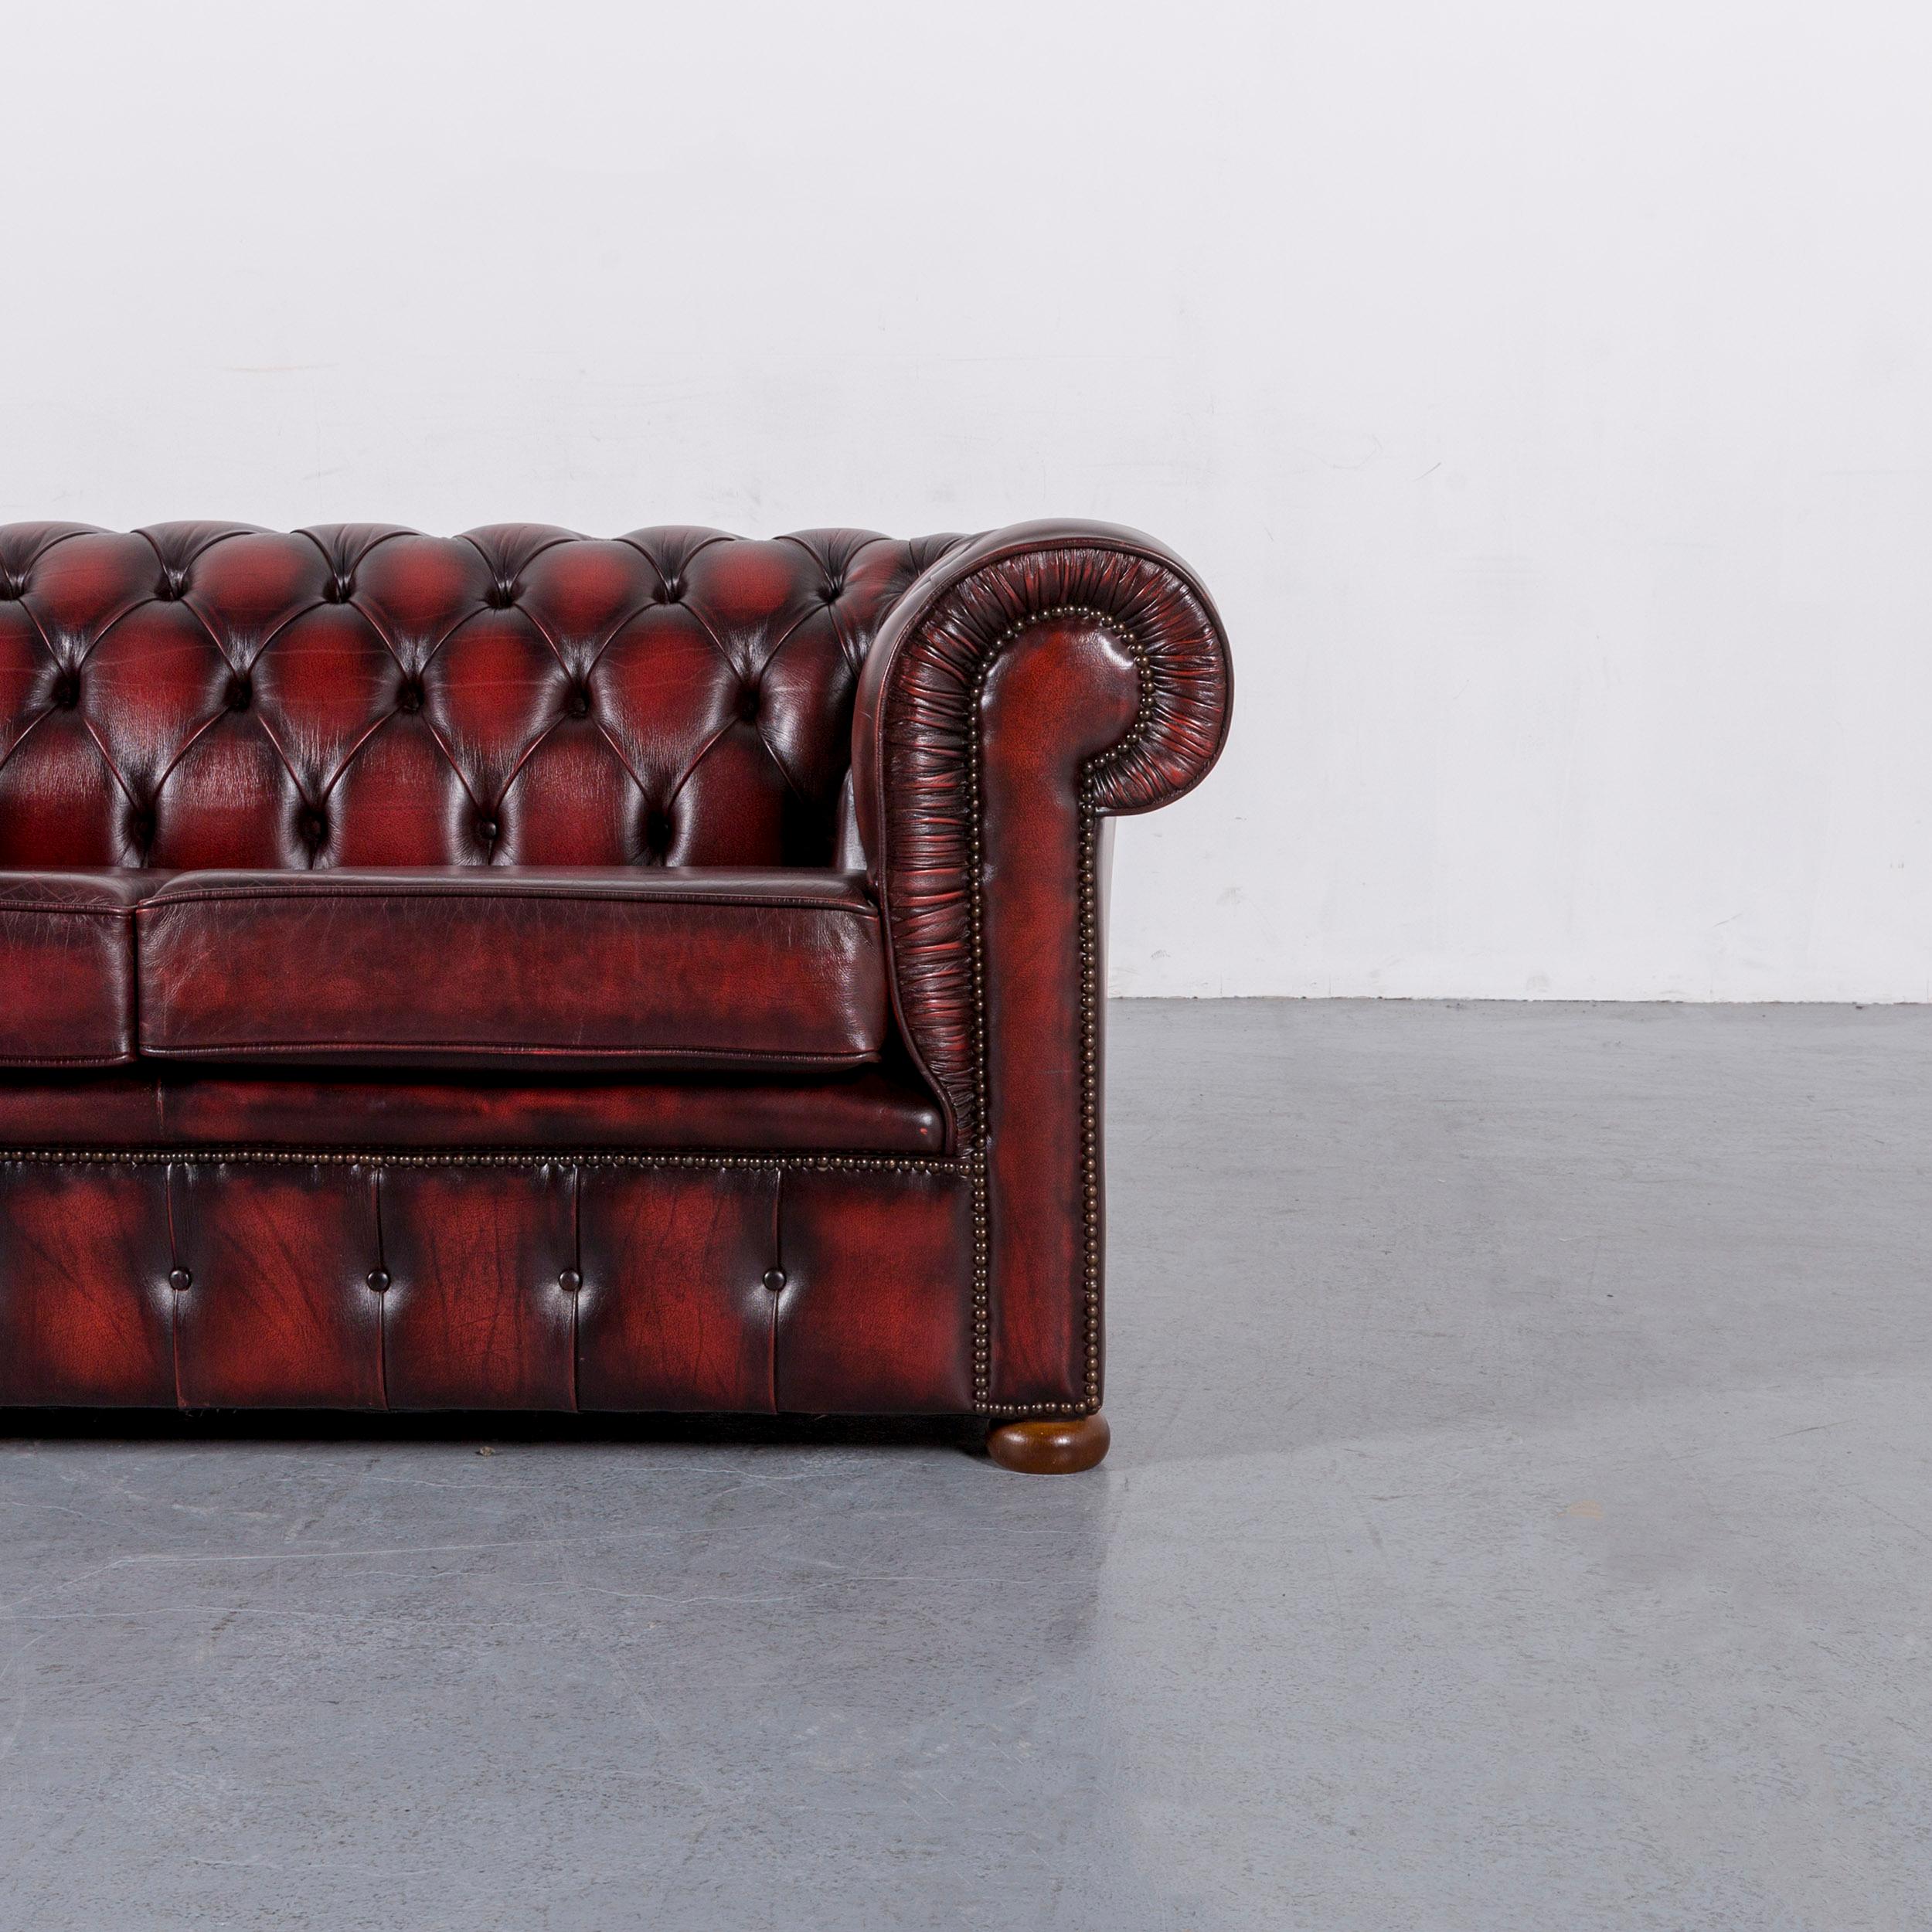 British Chesterfield Leather Sofa Red Two-Seat Vintage Retro